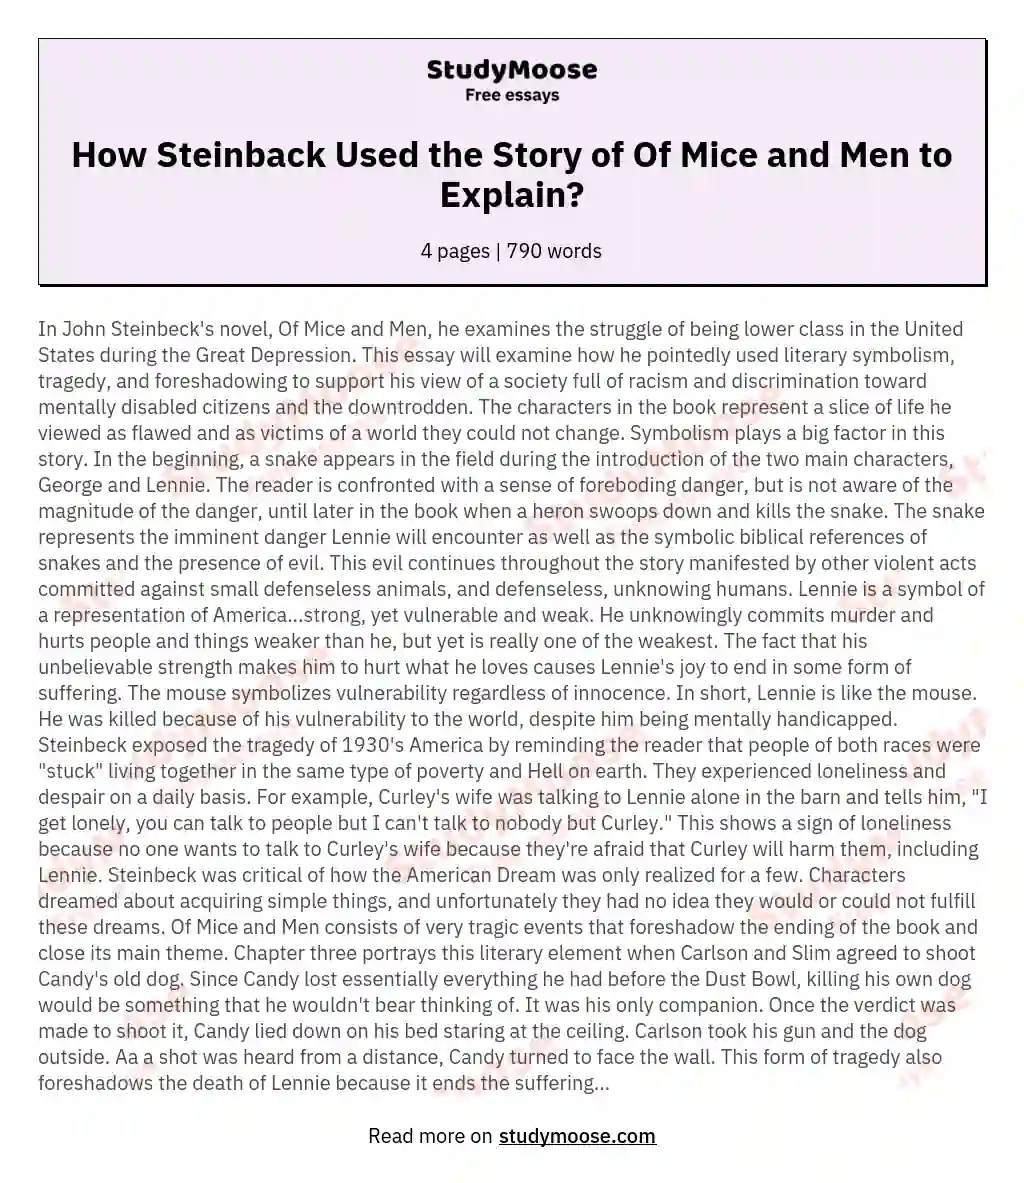 How Steinback Used the Story of Of Mice and Men to Explain? essay